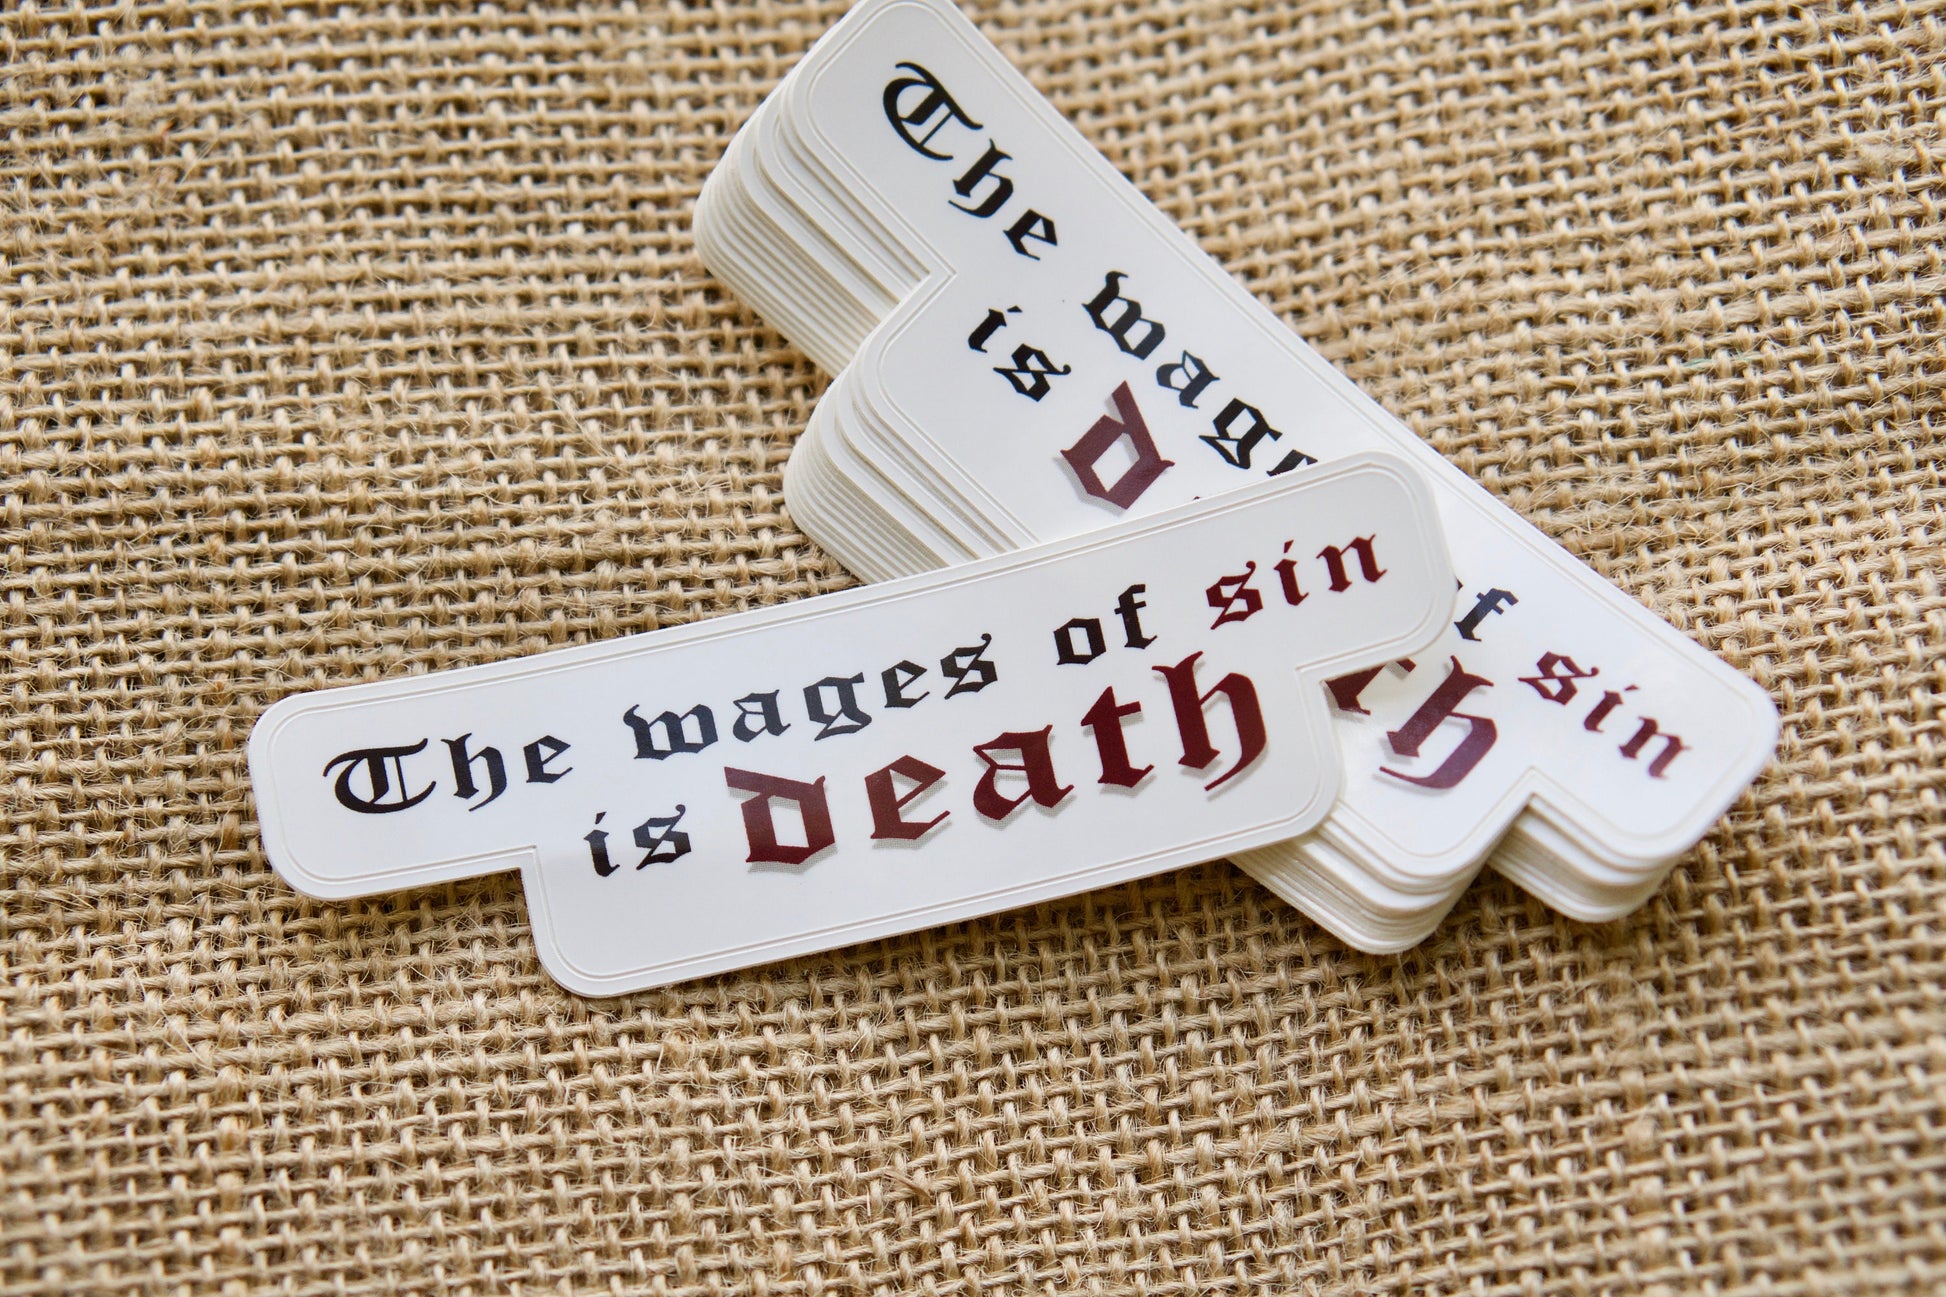 Wages of Sin - Vinyl Sticker, 4" x 1", Reminder of Eternal Consequences, Perfect for Laptops, Water Bottles, Notebooks, & Stocking Stuffers, Shop Catholic Gifts at Sanctus Servo.